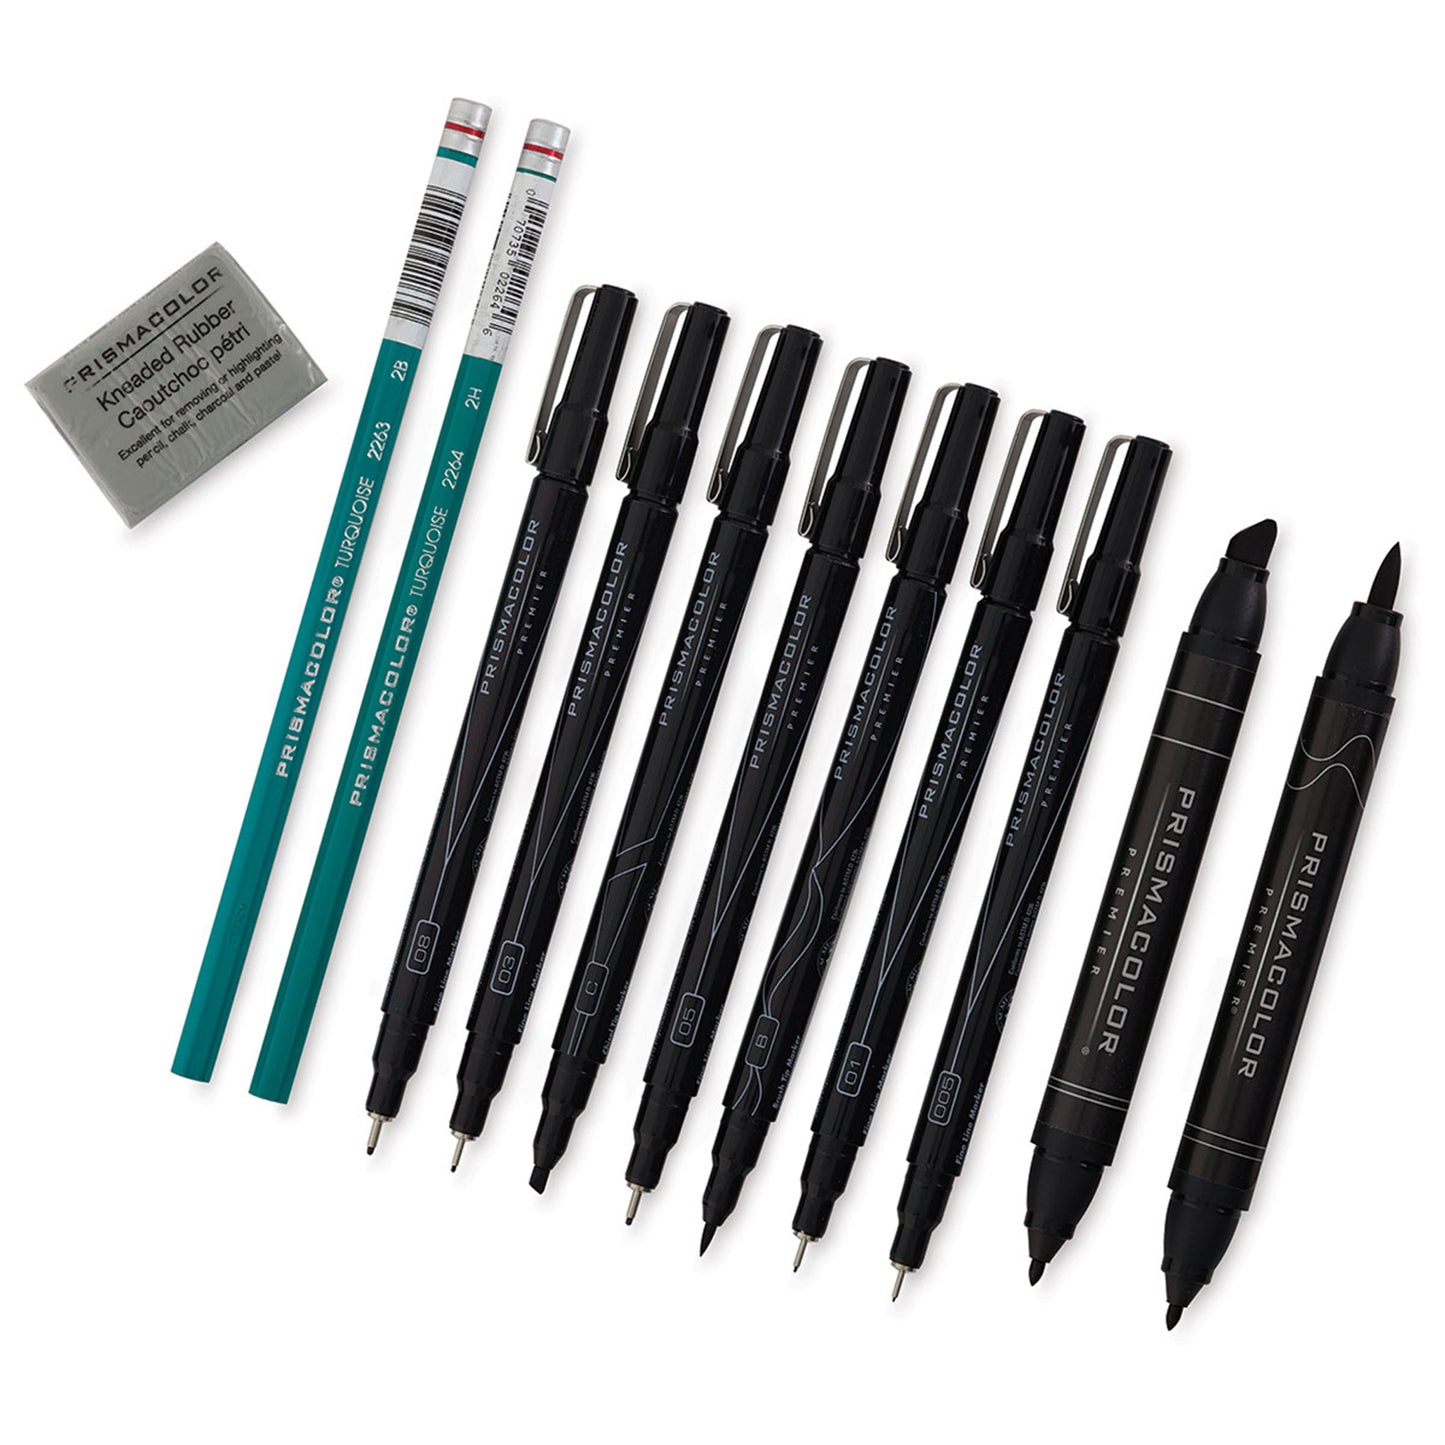 A line up of 9 black markers in different sizes, two teal pencils and one grey eraser.